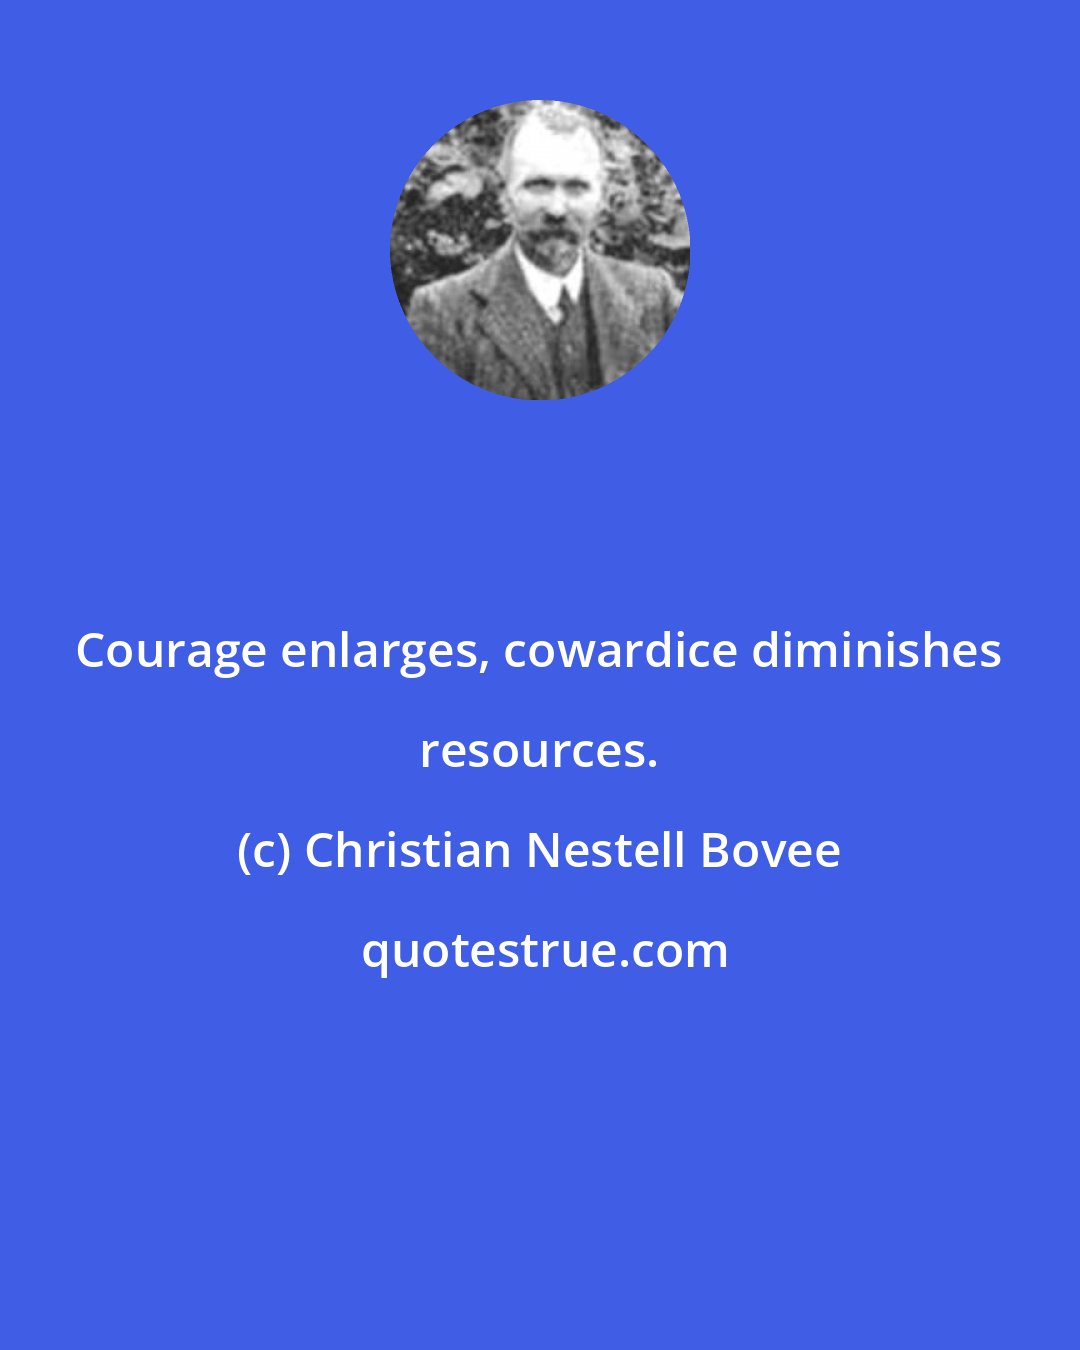 Christian Nestell Bovee: Courage enlarges, cowardice diminishes resources.